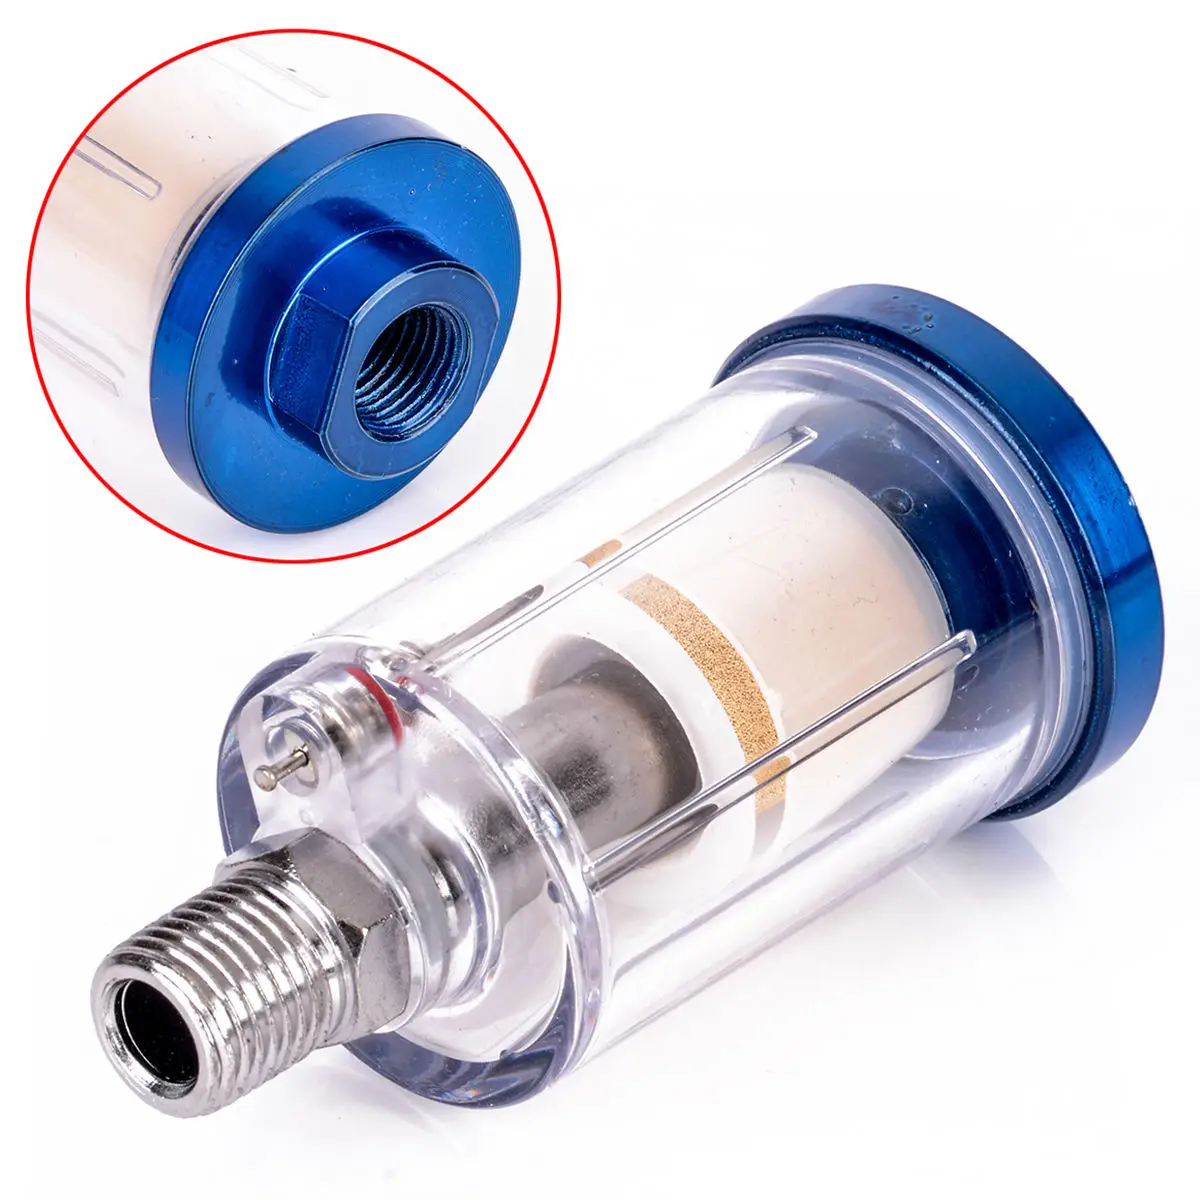 1pcs 1/4" Car Air Line Oil Water Trap Separator Filter For Compressor Spray Paint Air Line Filter Tool High Quality